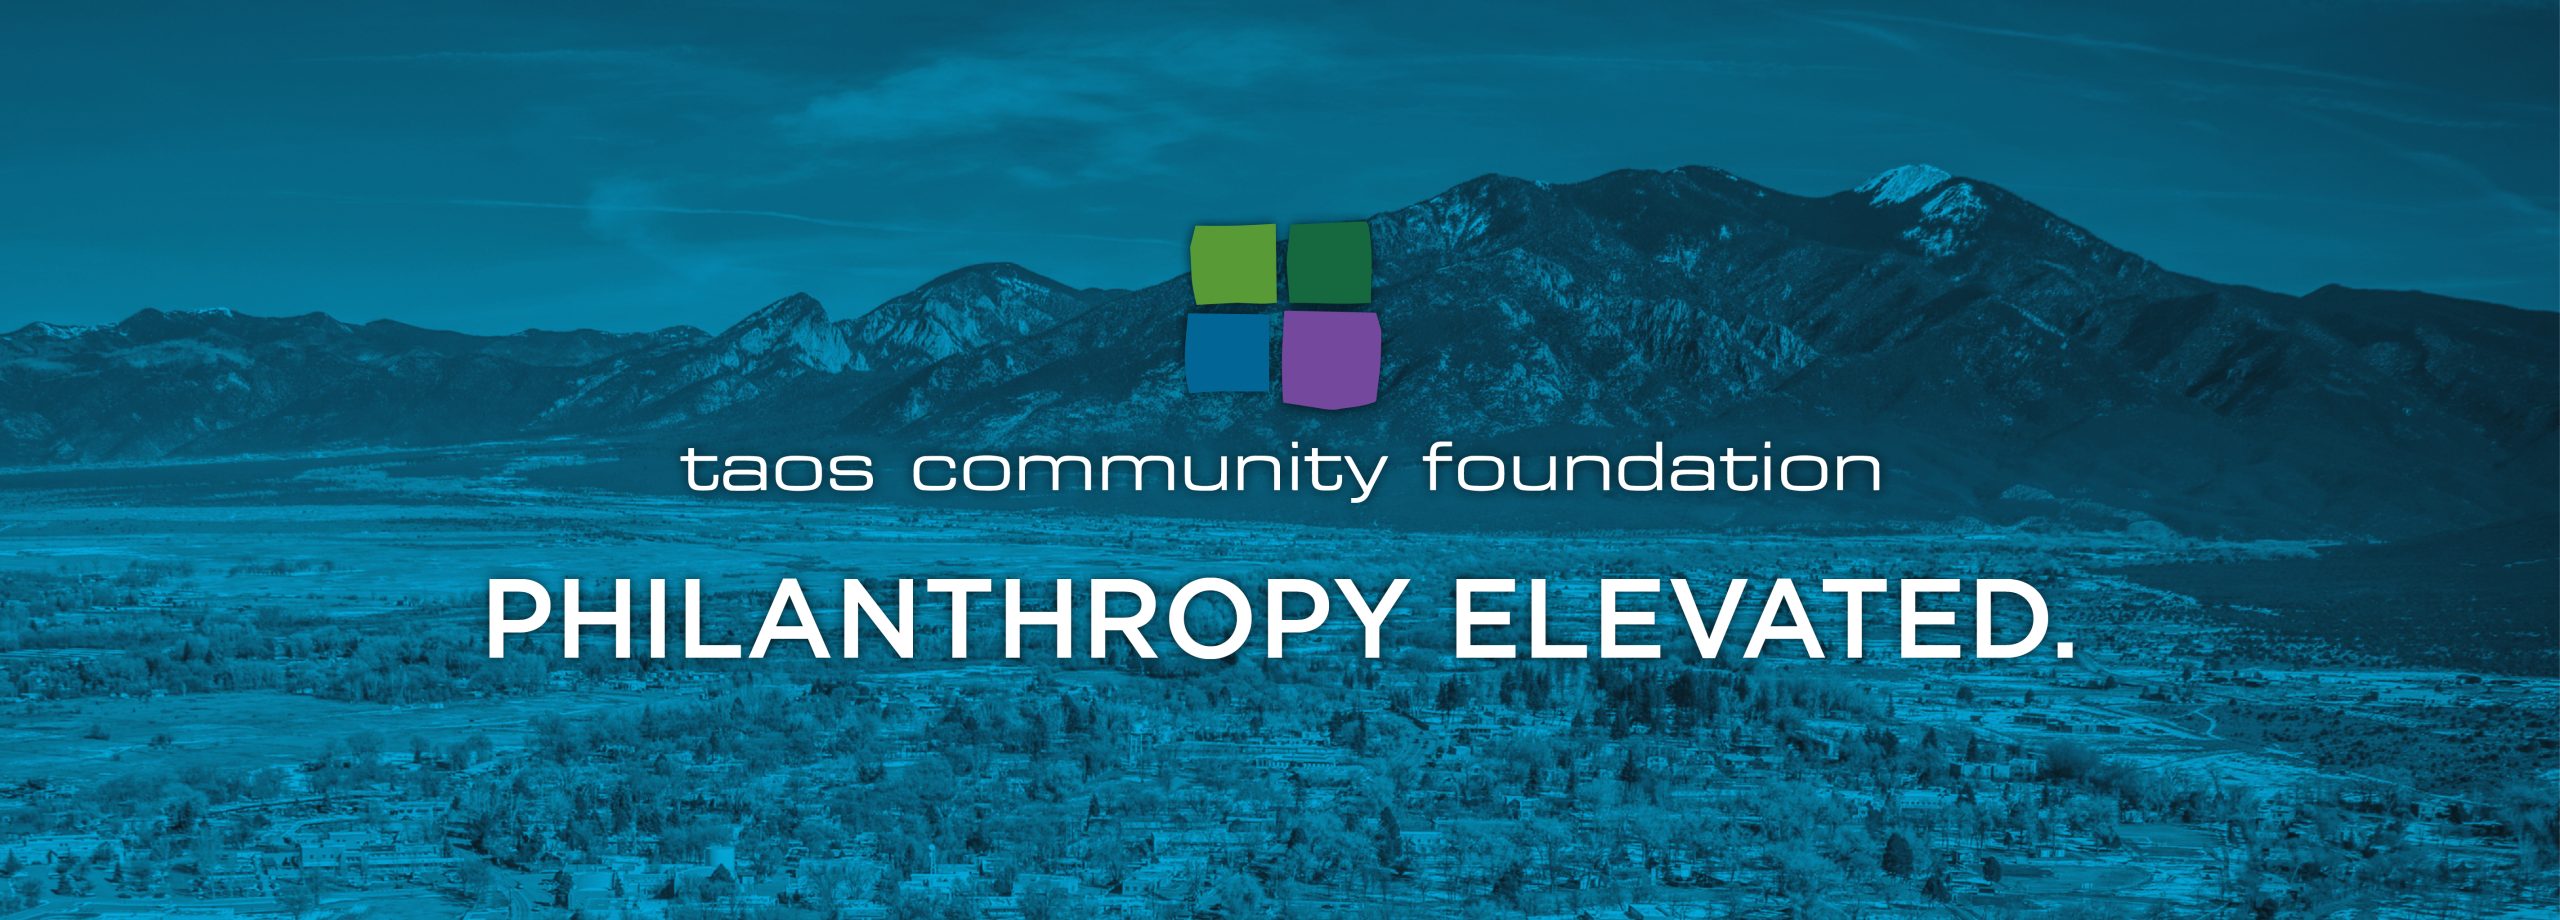 Logo of Taos Community Foundation over a picture of Taos New Mexico, with the words "Philanthropy Elevated."